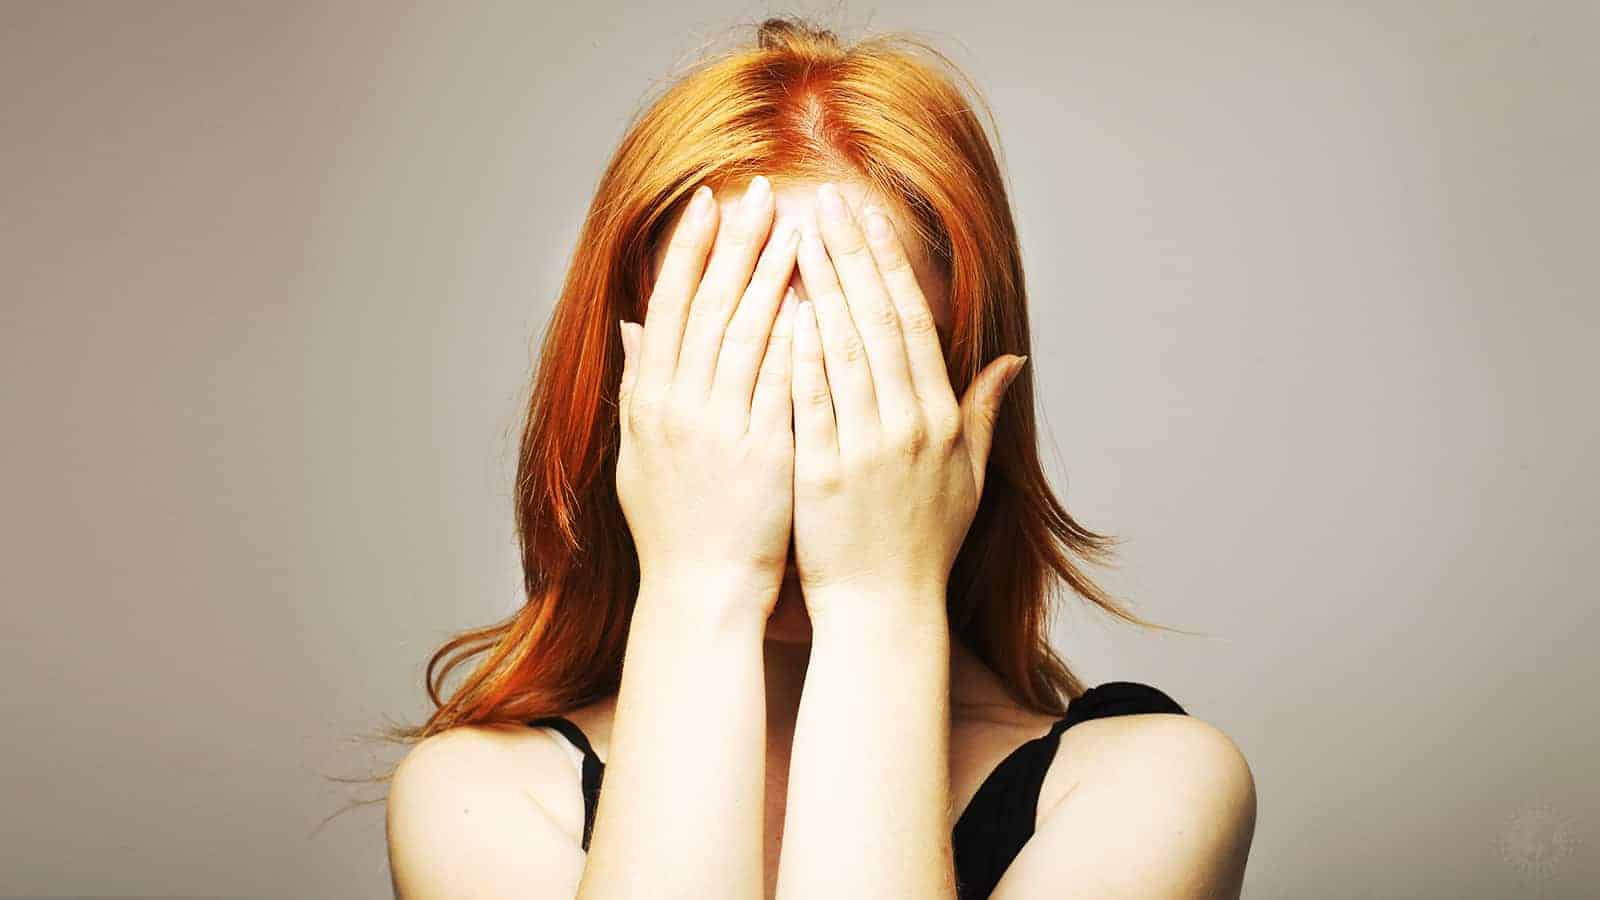 New Study Reveals Redheads Have Higher Pain Tolerance